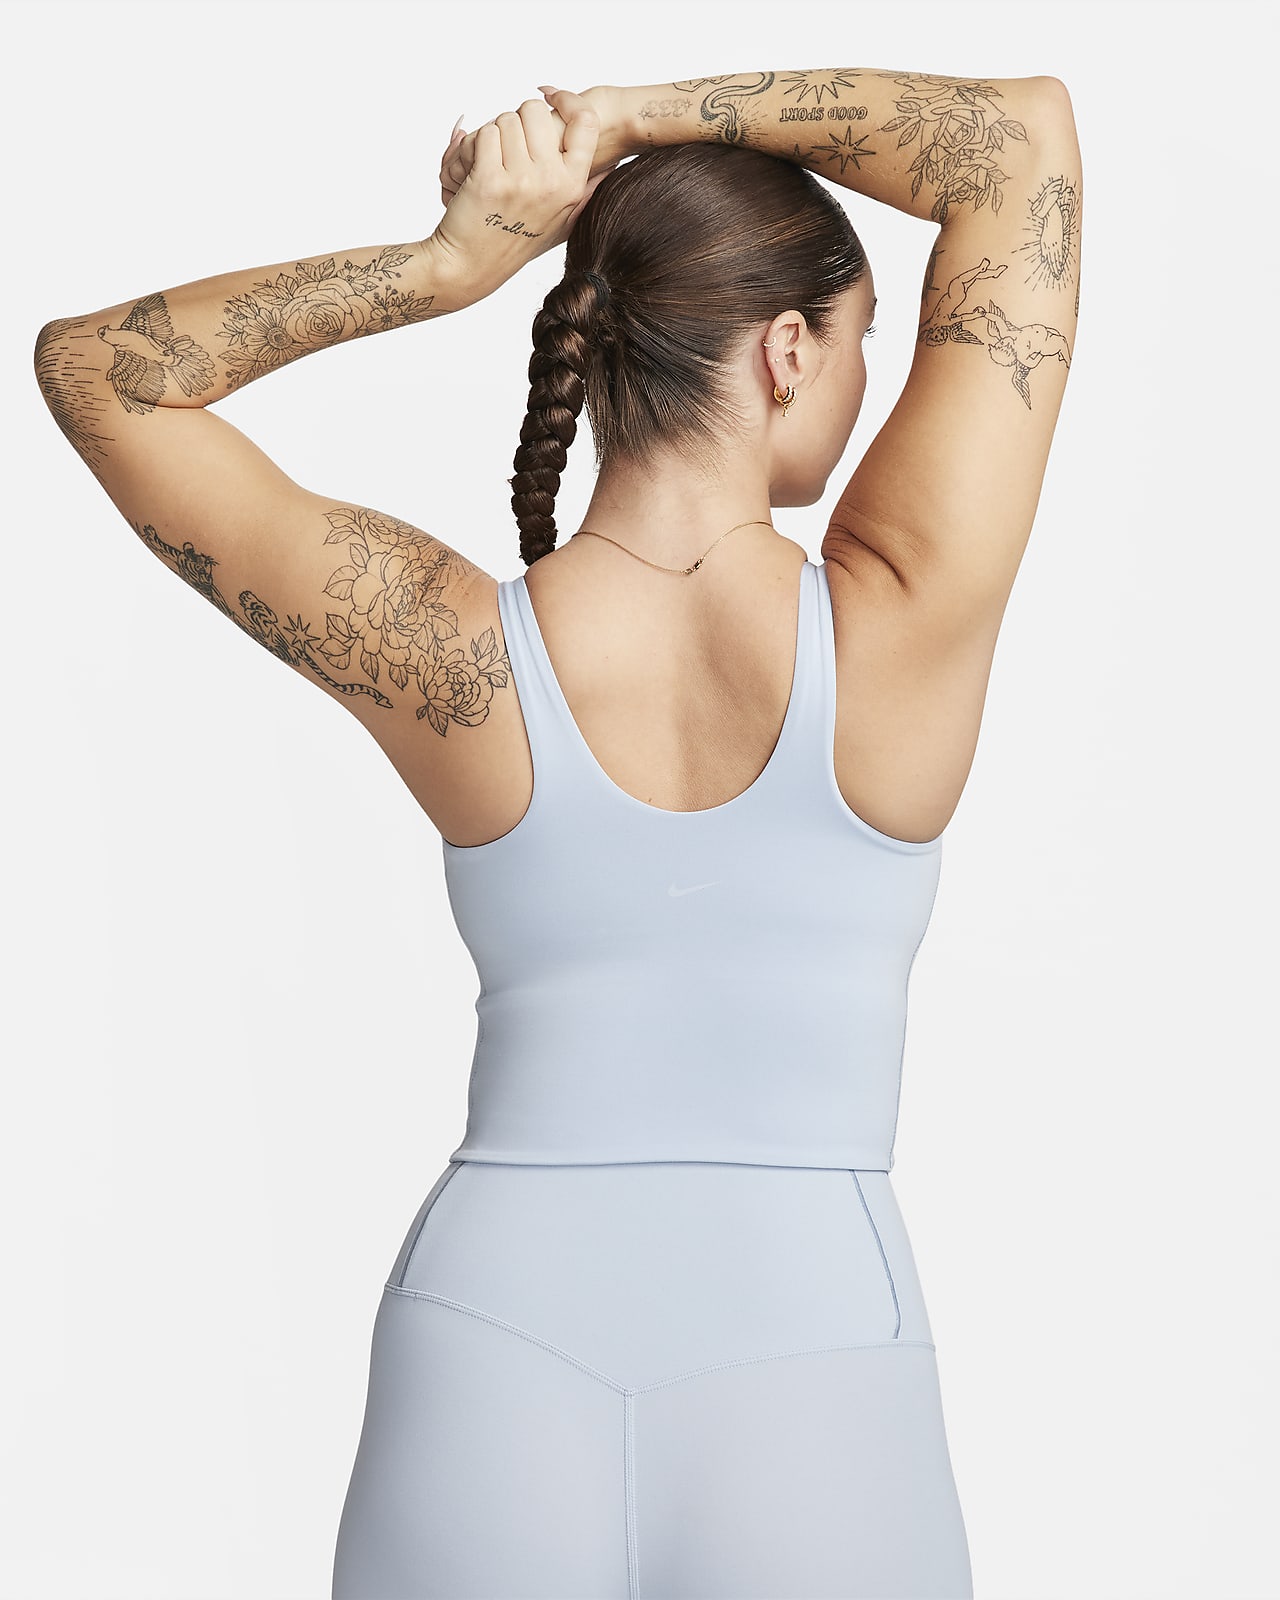 https://static.nike.com/a/images/t_PDP_1280_v1/f_auto,q_auto:eco/af8802a5-2c3c-4b2e-95db-3fd7330fadb4/alate-womens-medium-support-padded-sports-bra-tank-top-2ccq5g.png